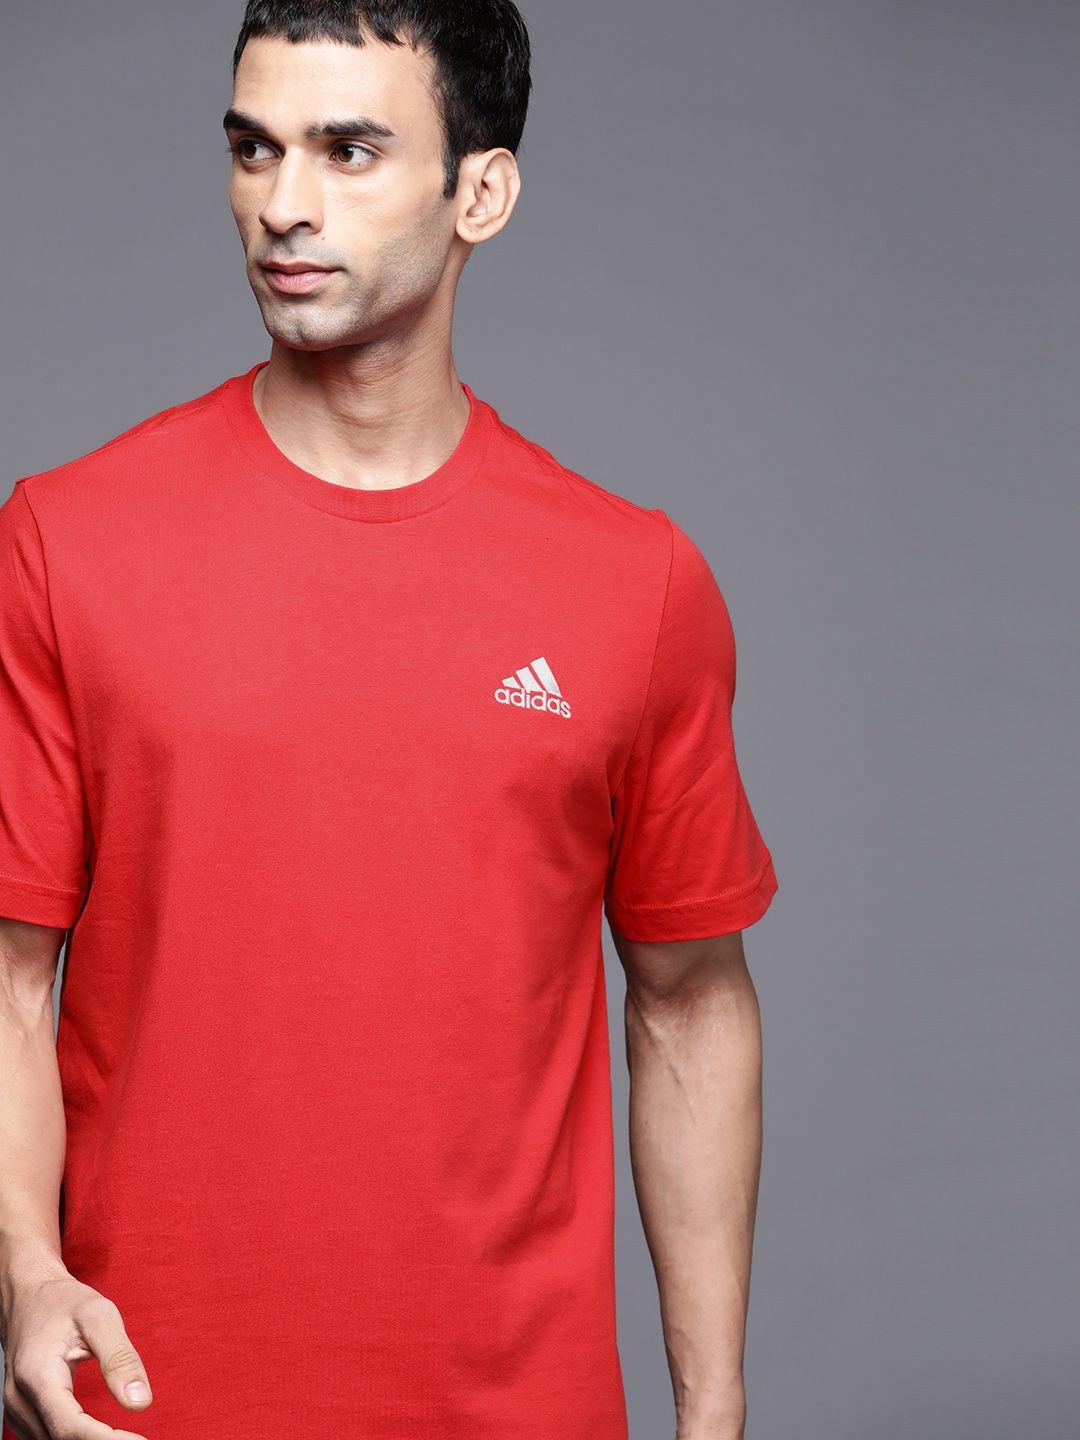 adidas men red pure cotton solid pure cotton t-shirt